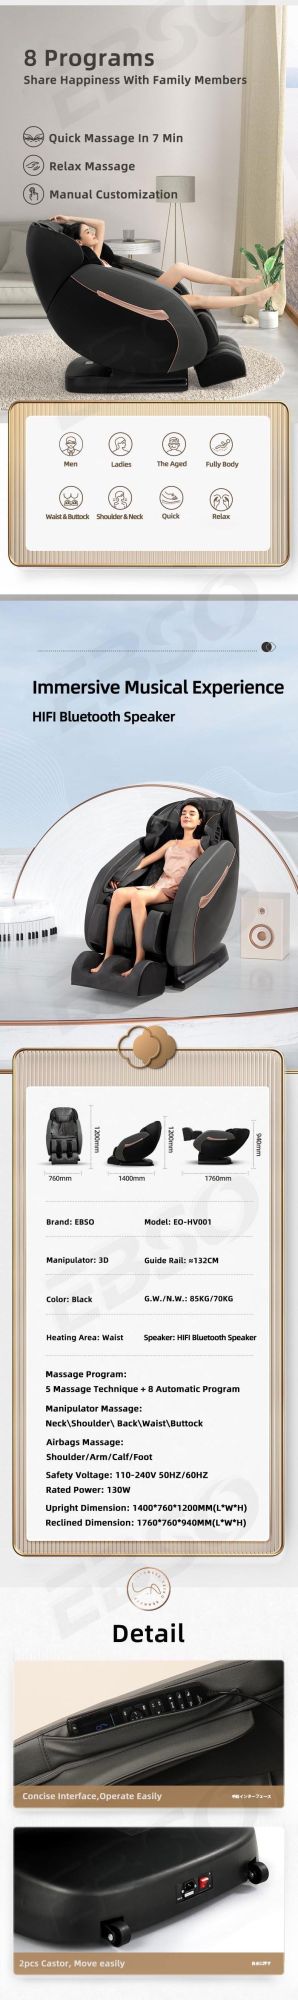 High Quality Smart Massage Chair with Wire Controller Massage Chair Luxury 2021